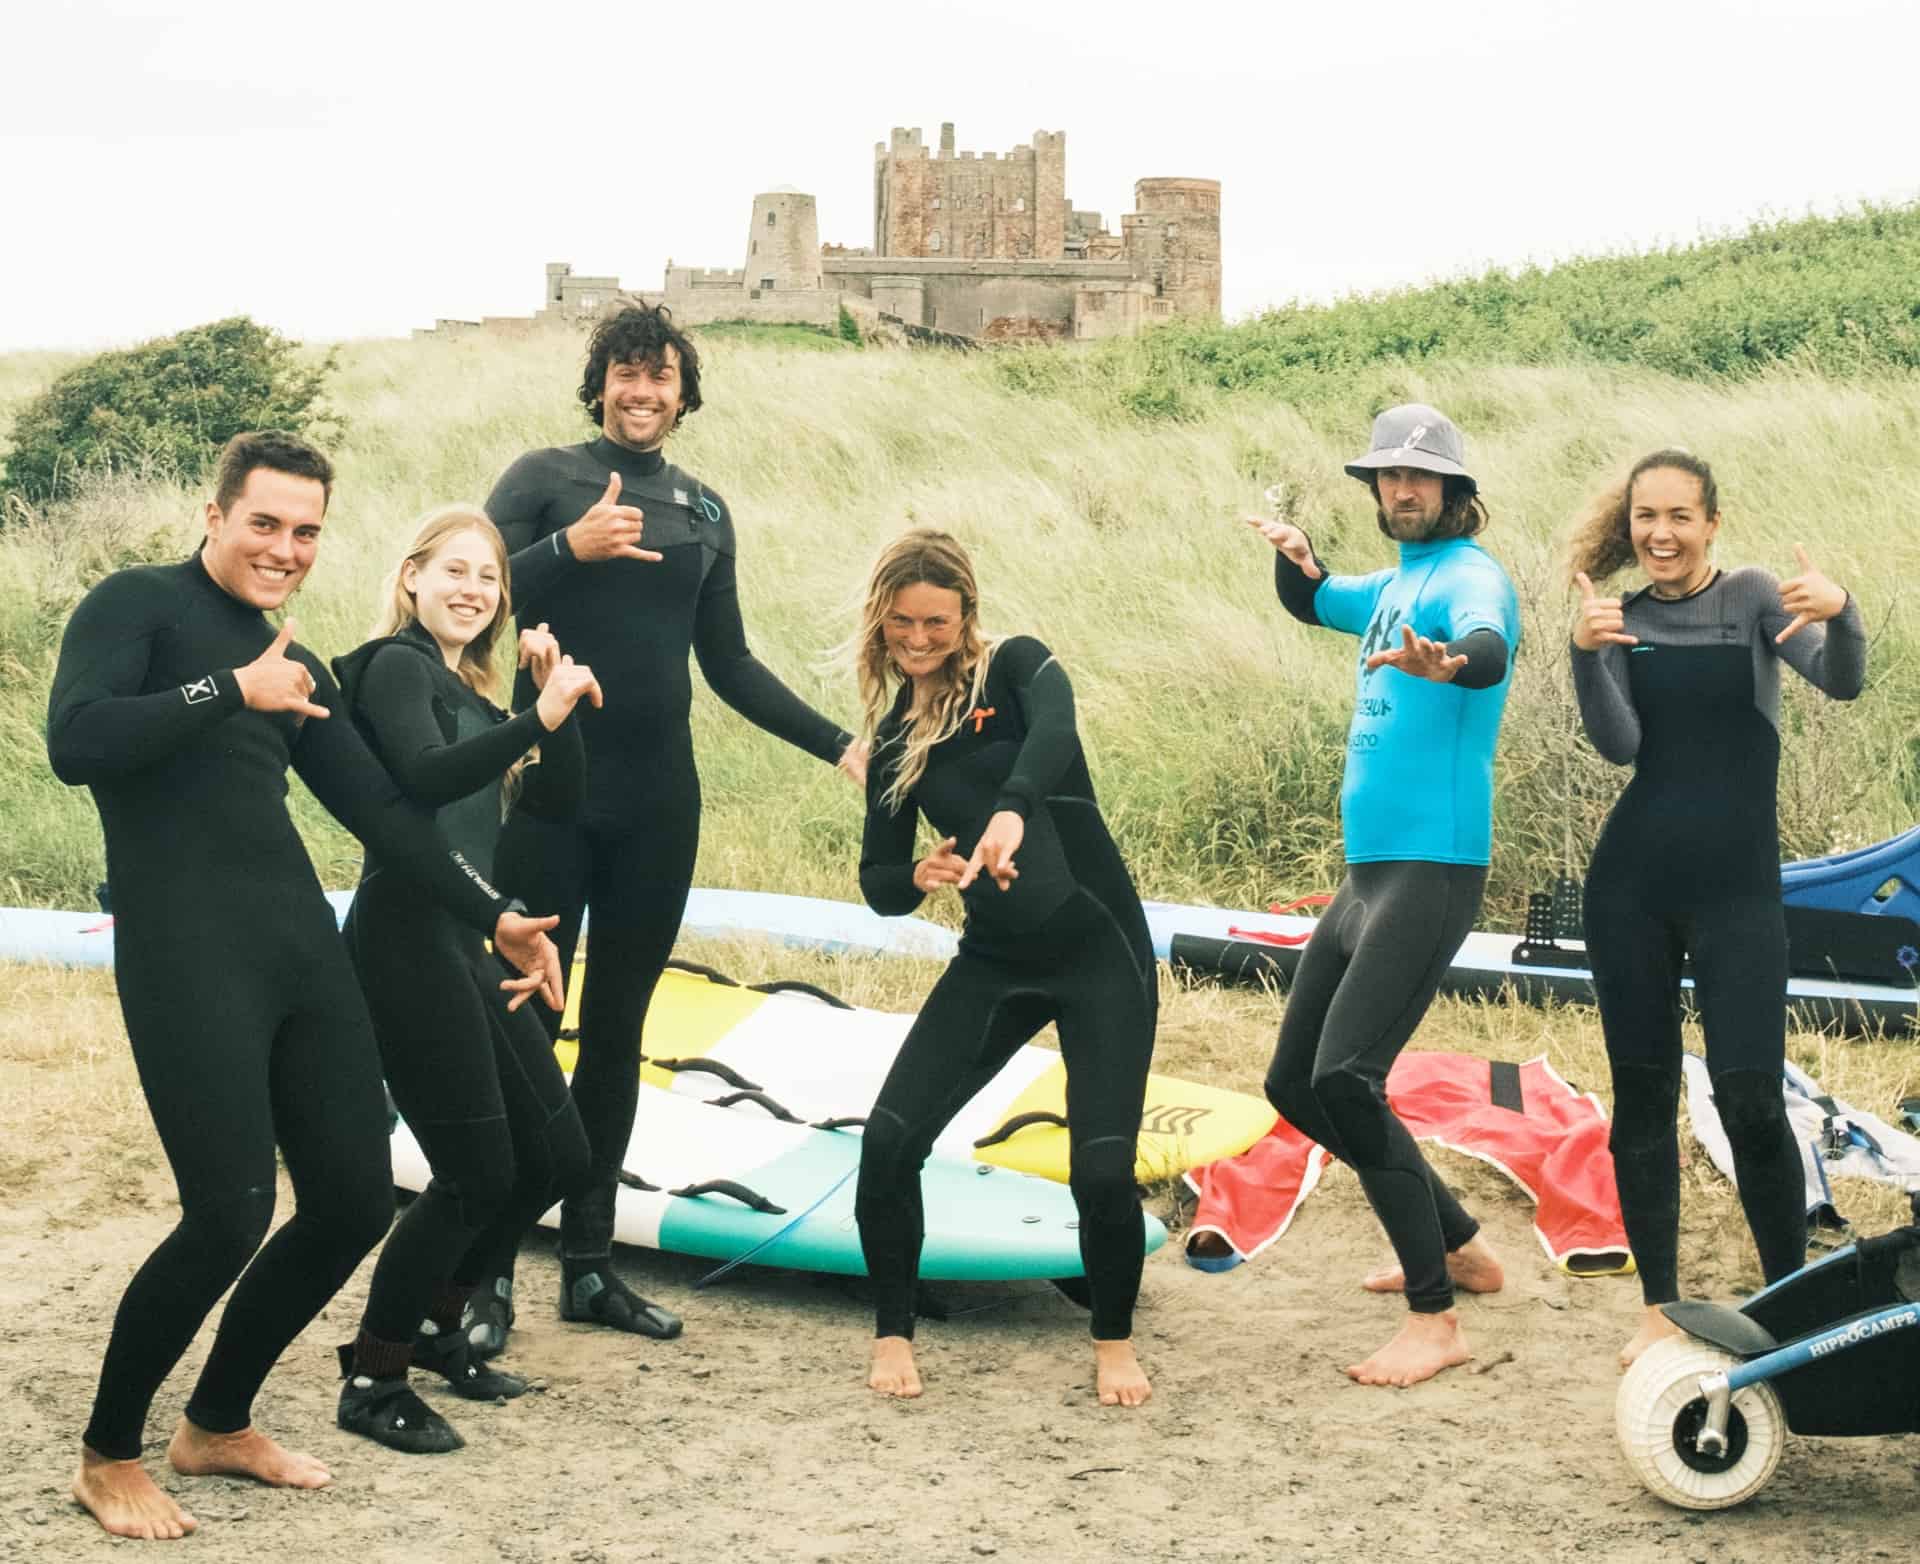 NE Surf school and Surfability pose for a picture infront of Bamburgh Castle with adaptive surfing equipment